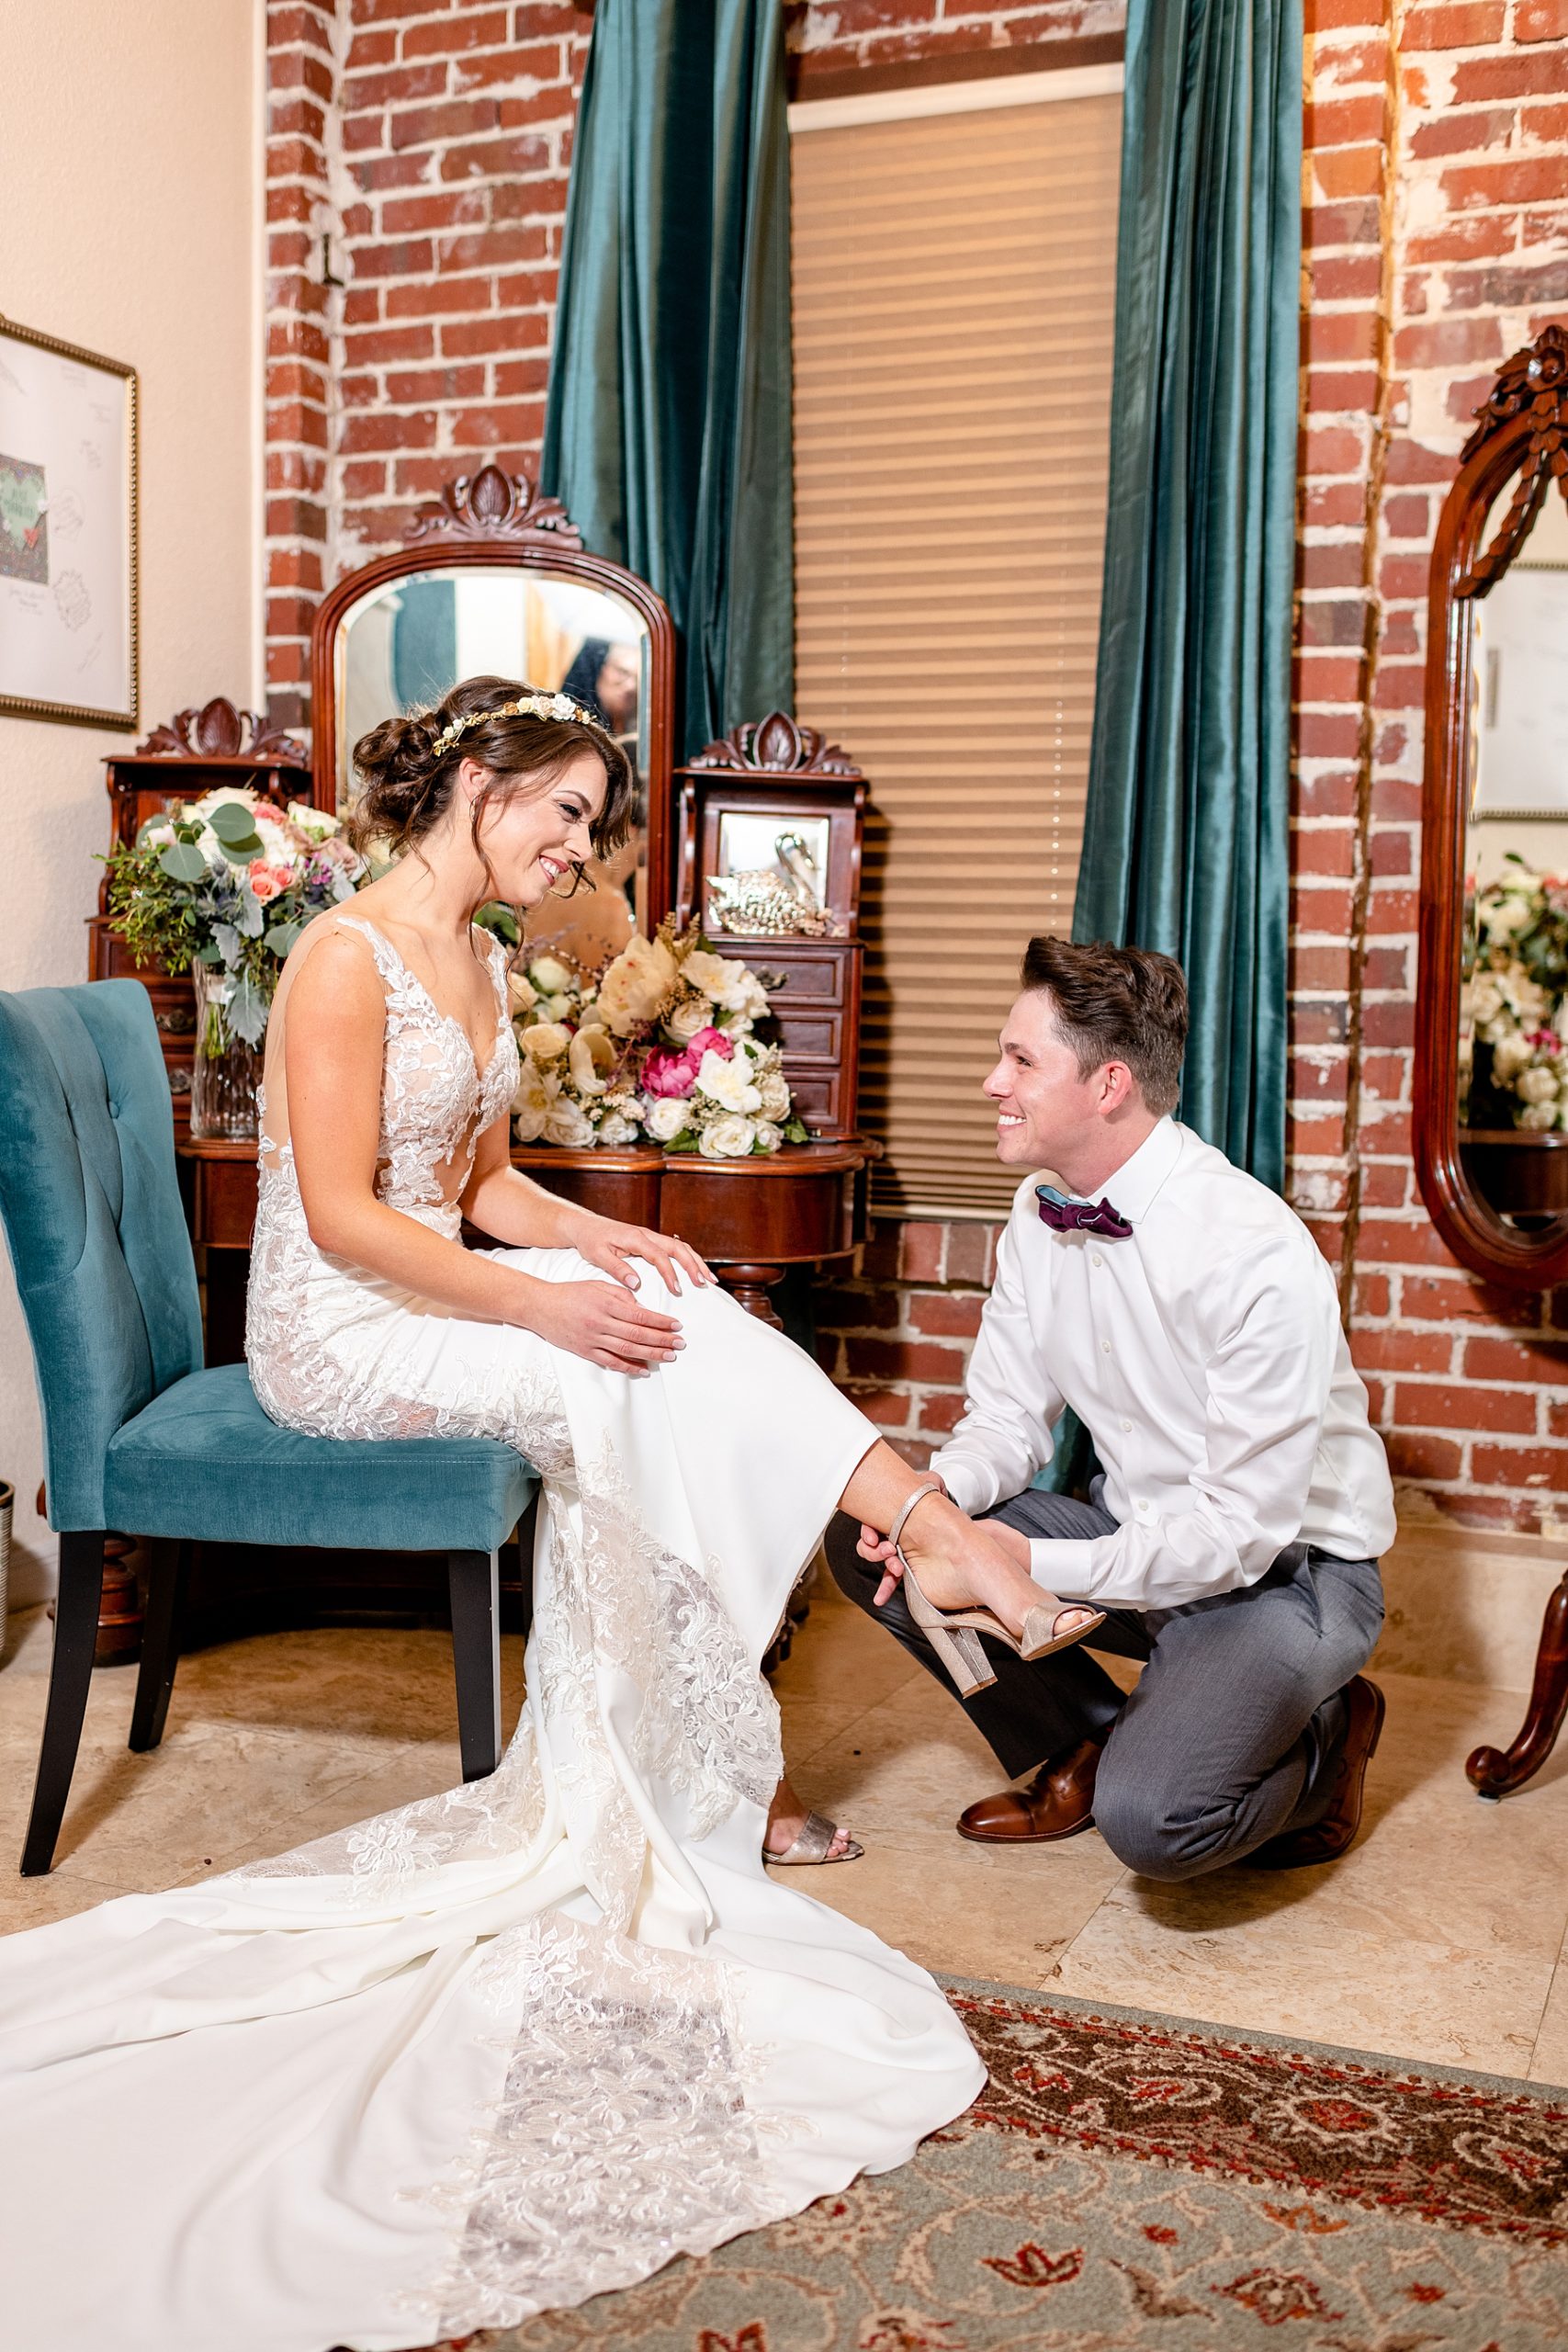 Bride putting wedding shoes on | Town Manor | Chynna Pacheco Photography